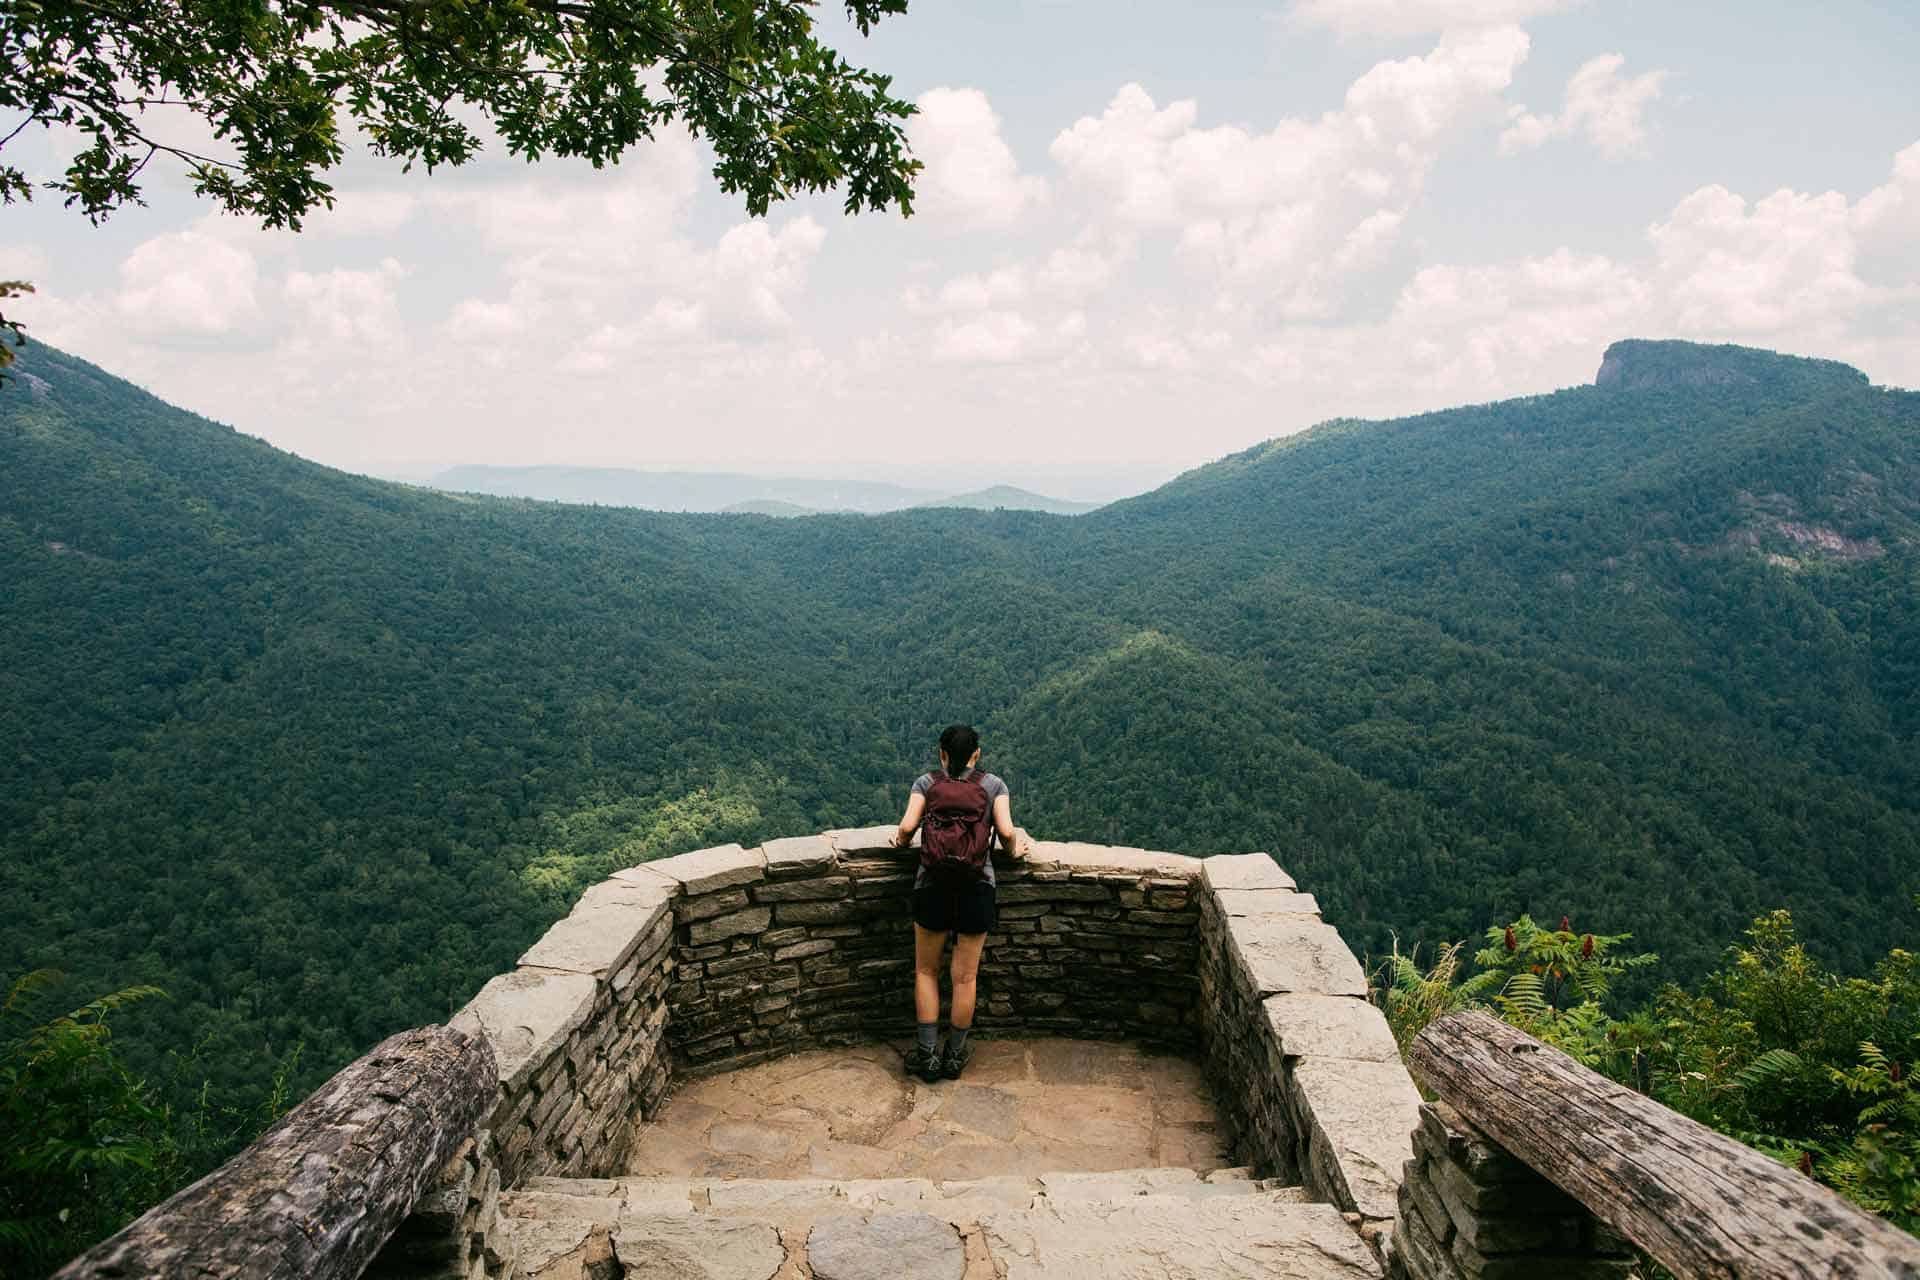 The 15 Best Things To Do In Asheville, NC